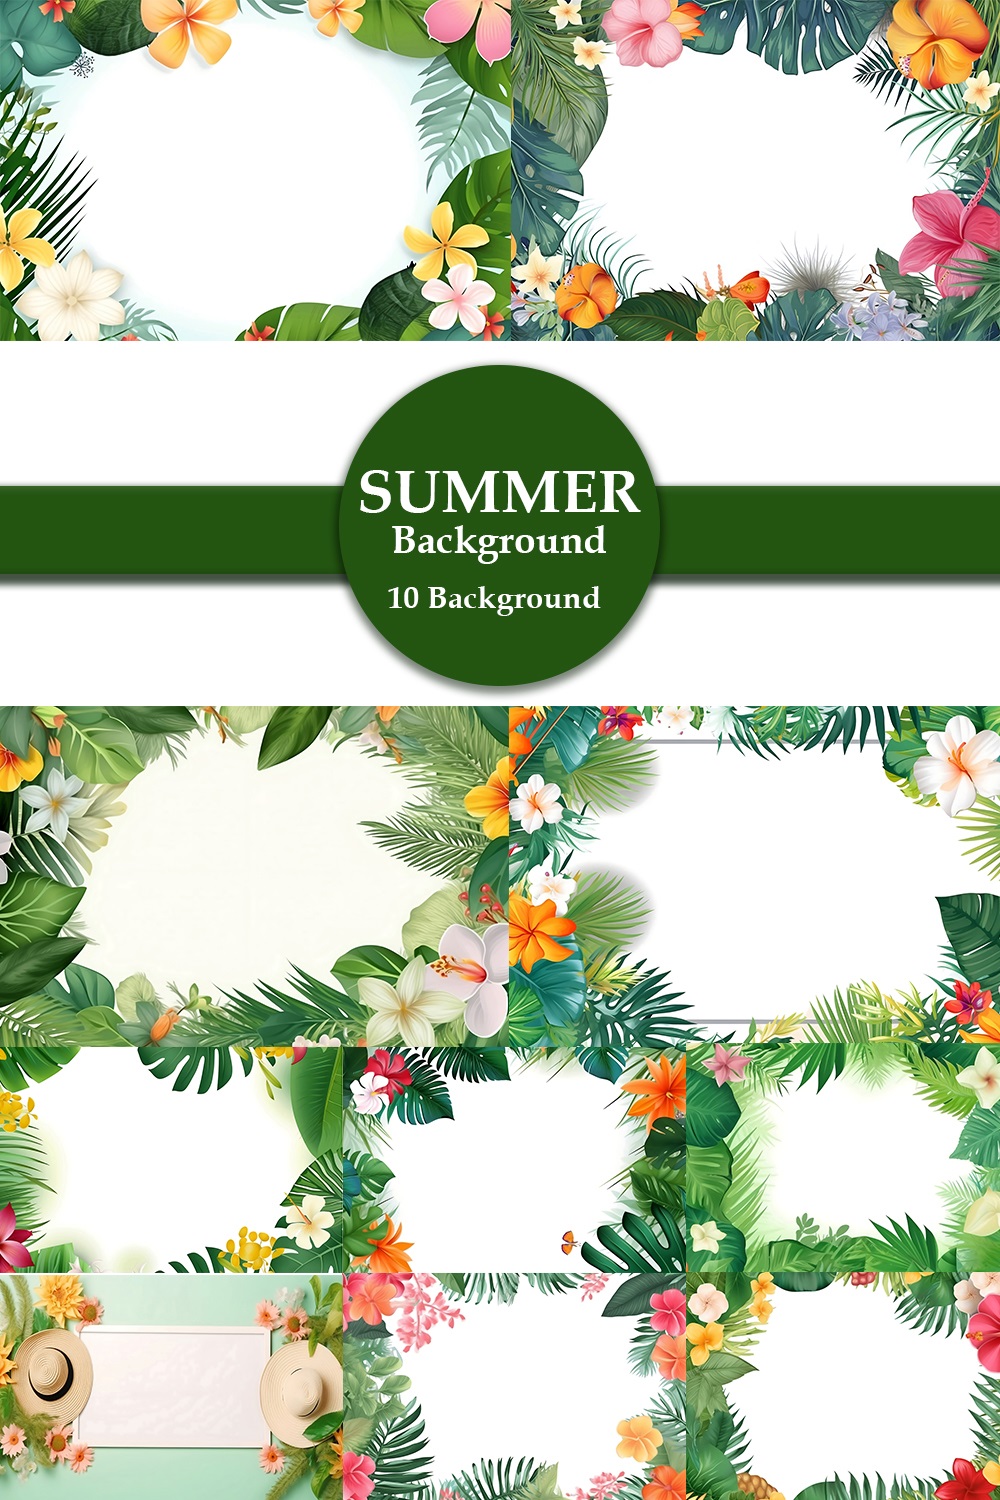 Summer Frame or Border with tropical palm leaves and flowers on white background pinterest preview image.